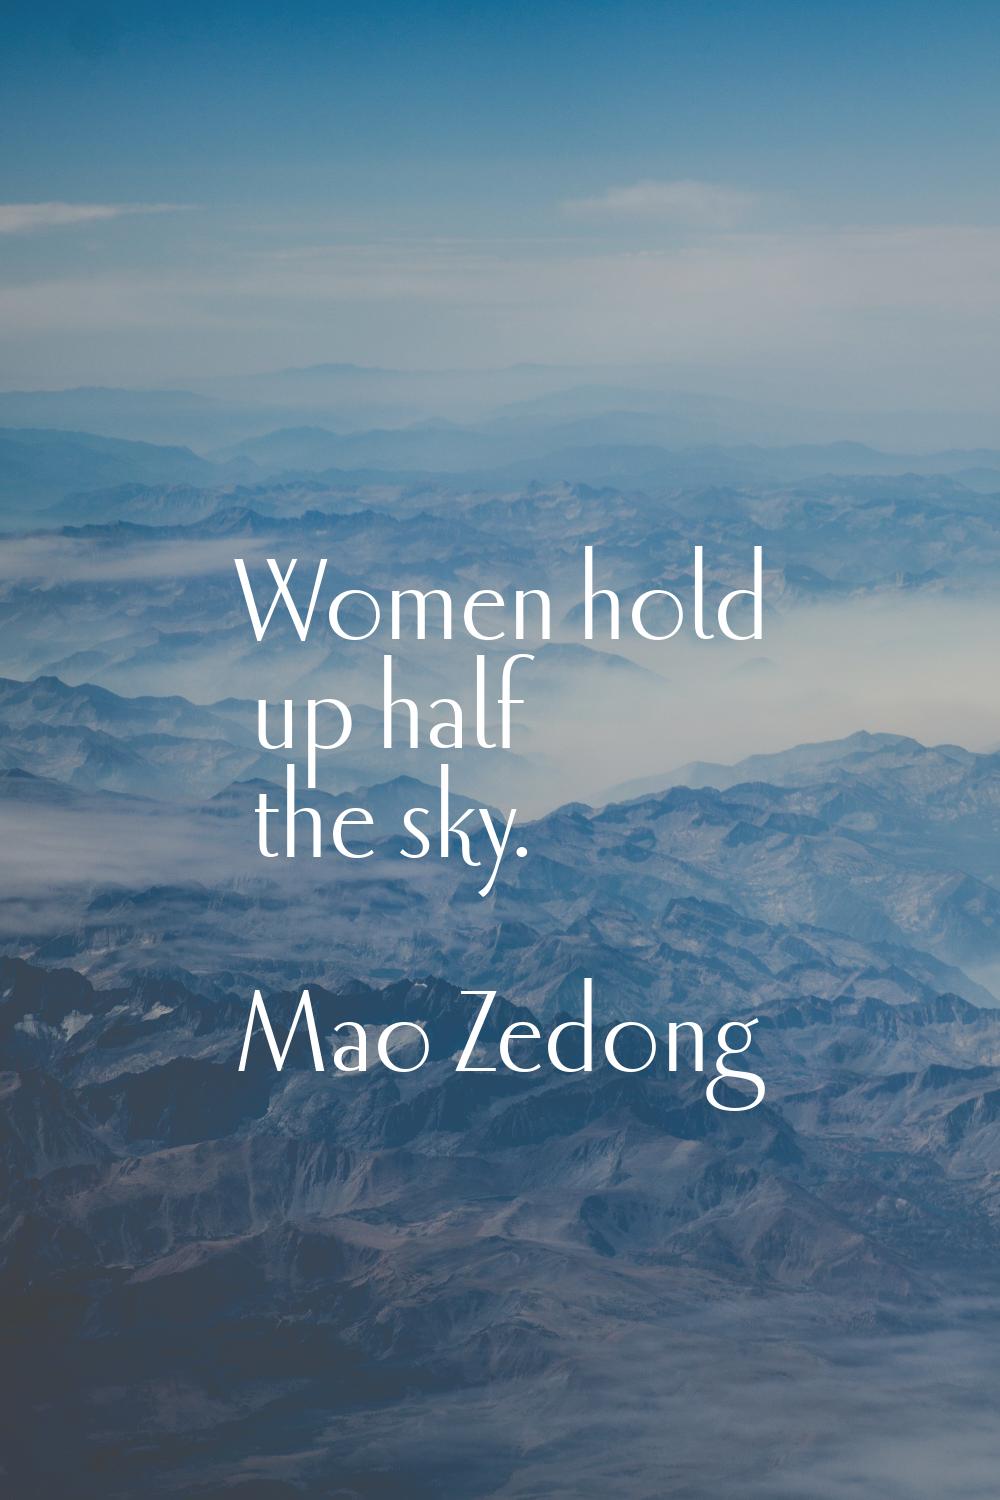 Women hold up half the sky.